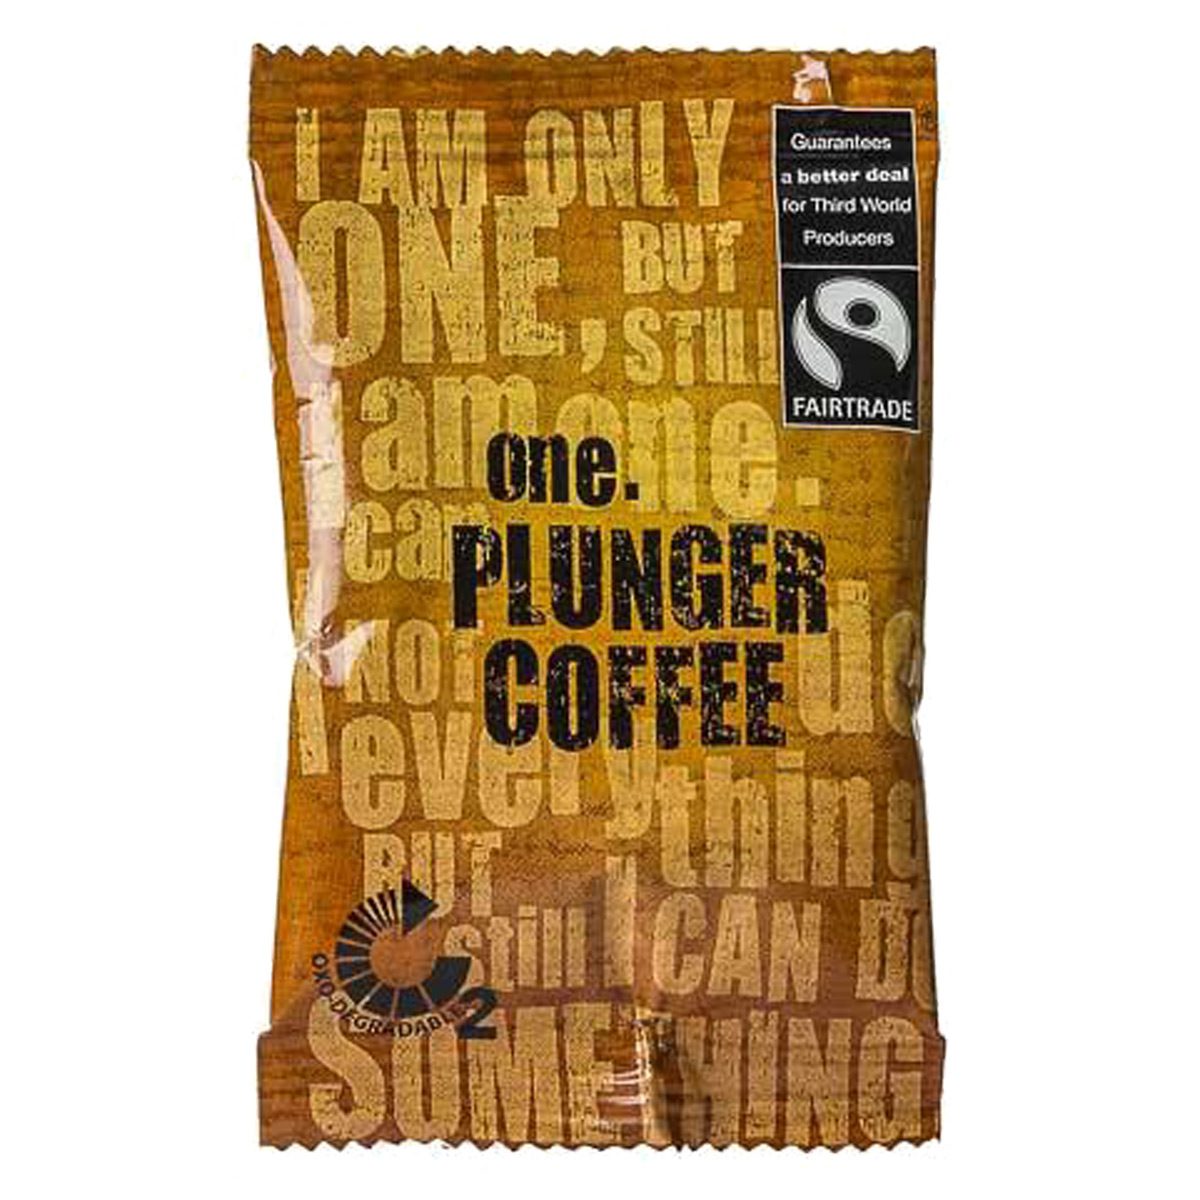 consumables-hospitality-beverage-food-one-plunger-coffee-sachet-x75pce-15gm-excellent-fairtrade-certified-premium-plunger-coffee-little-portion-control-sachet-guilt-free-vjs-distributors-ONECP